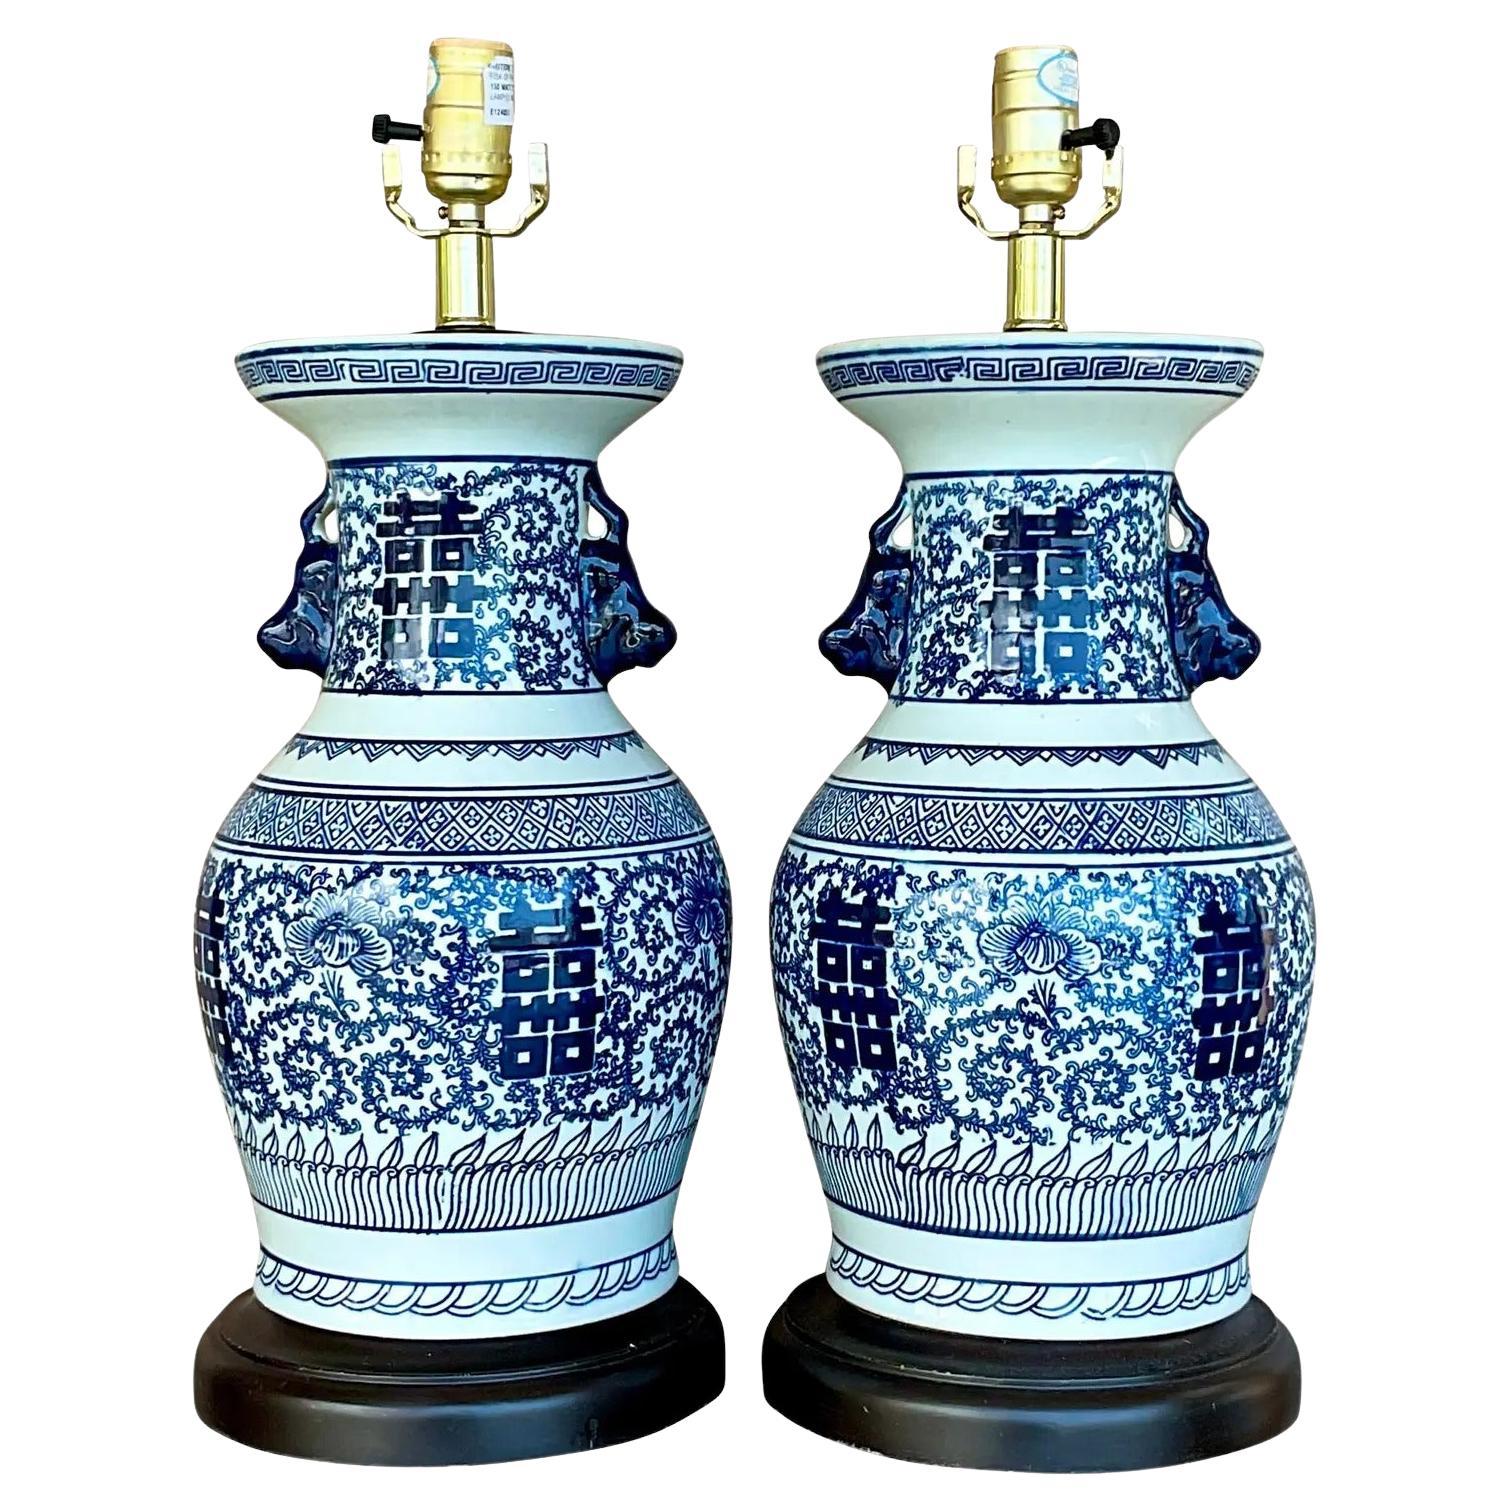 Vintage Asian Blue and White Glazed Ceramic Lamps - a Pair For Sale